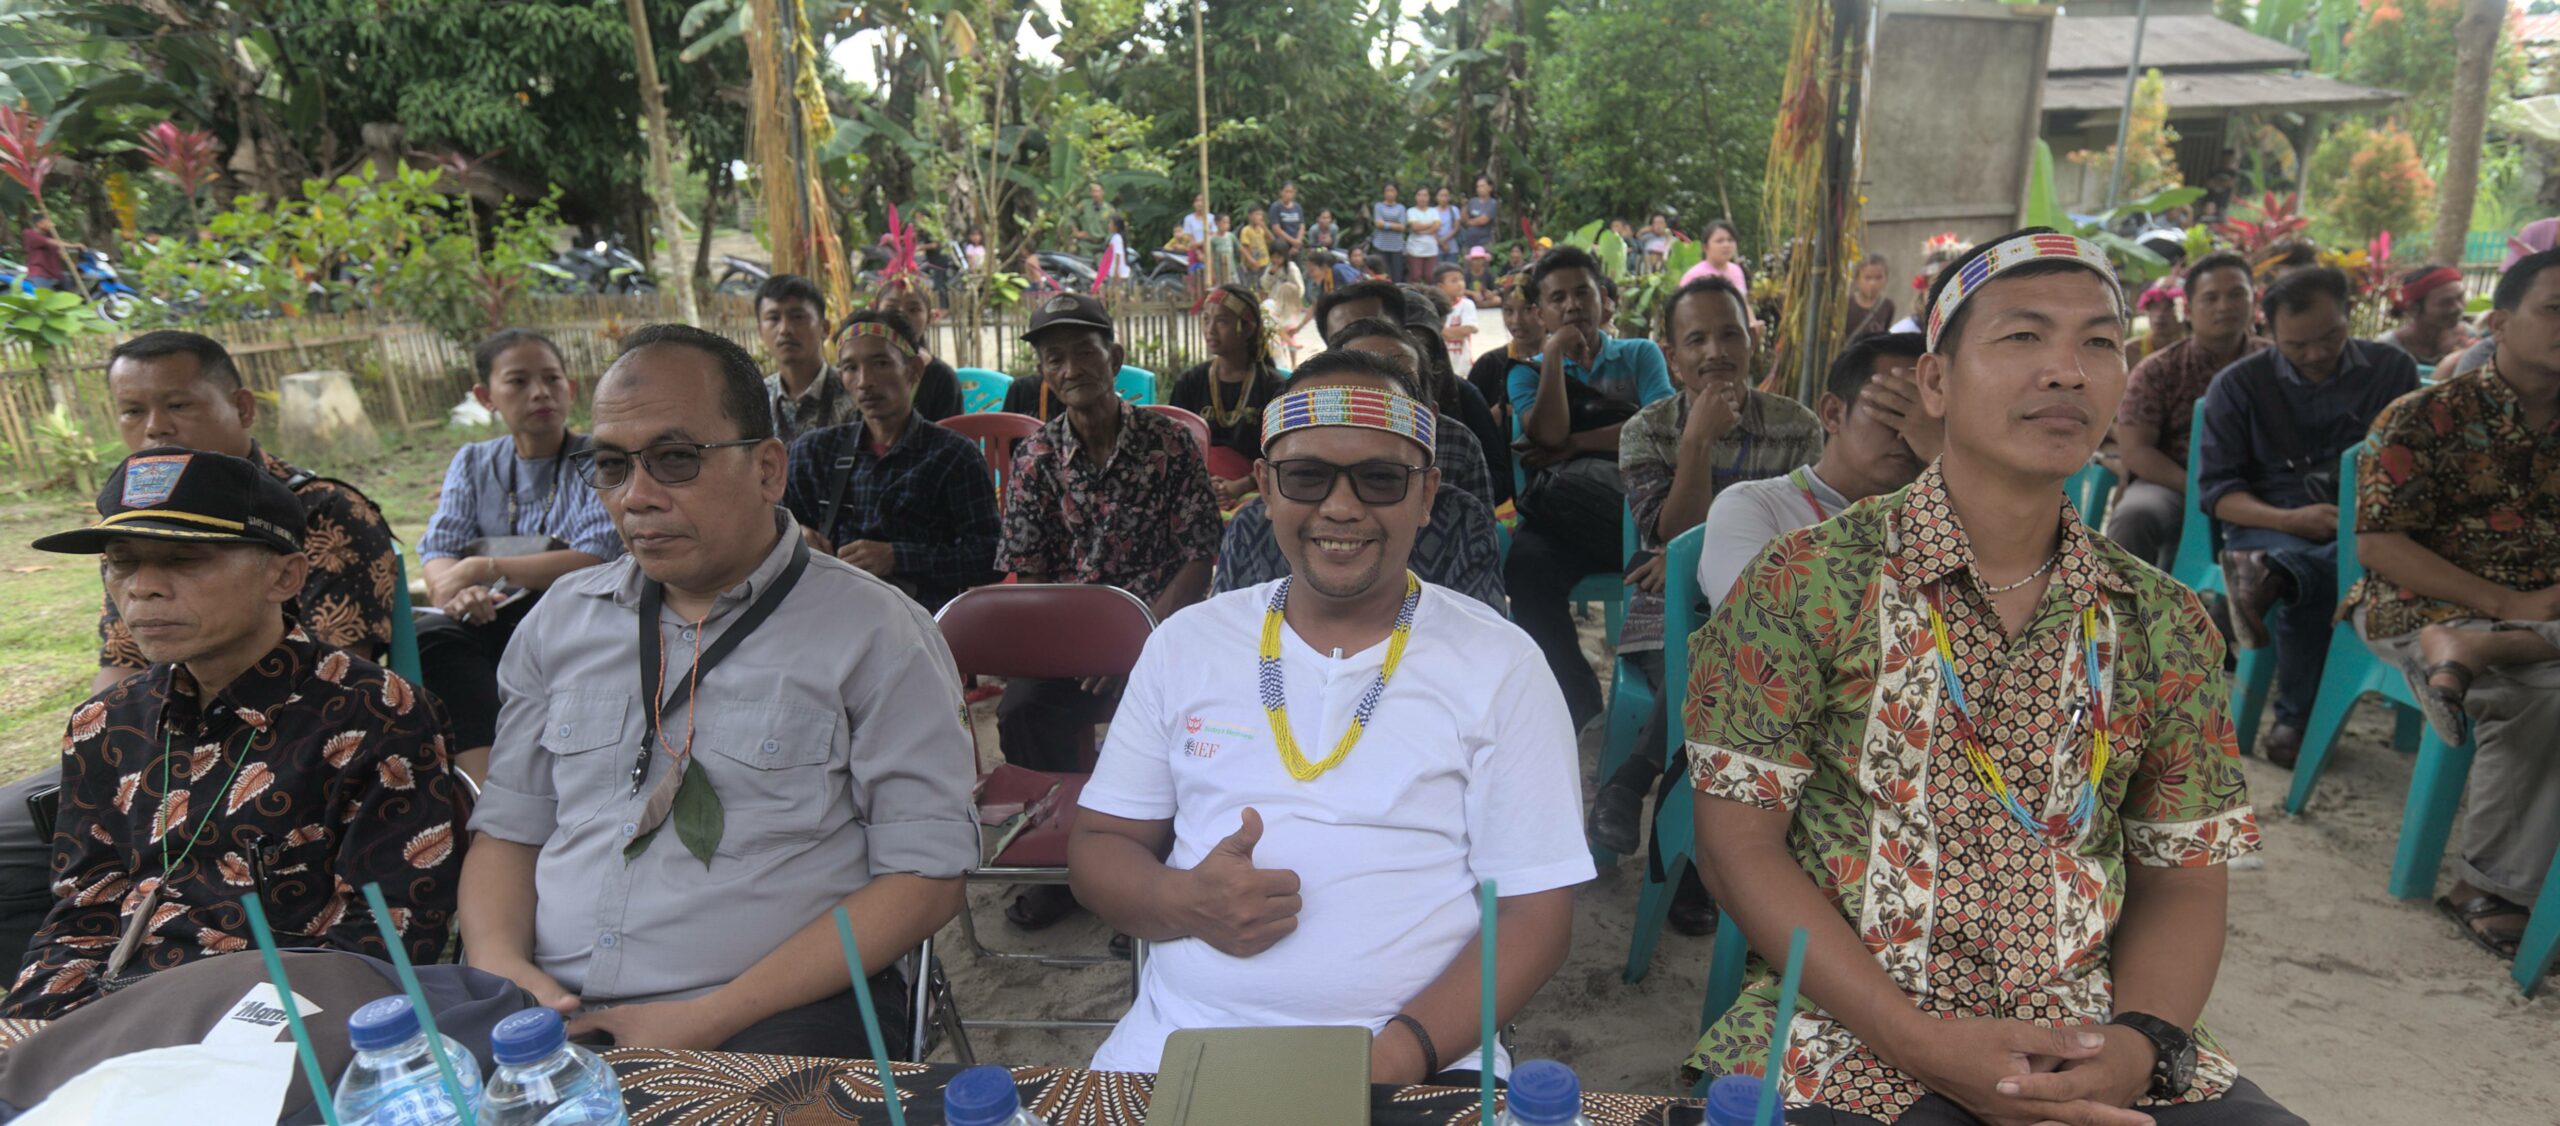 Fransiskus Yan (centre right) seated amongst Mentawai cultural learning hub leaders and Government officials at a cultural-based event facilitated by the Mentawai Foundation.